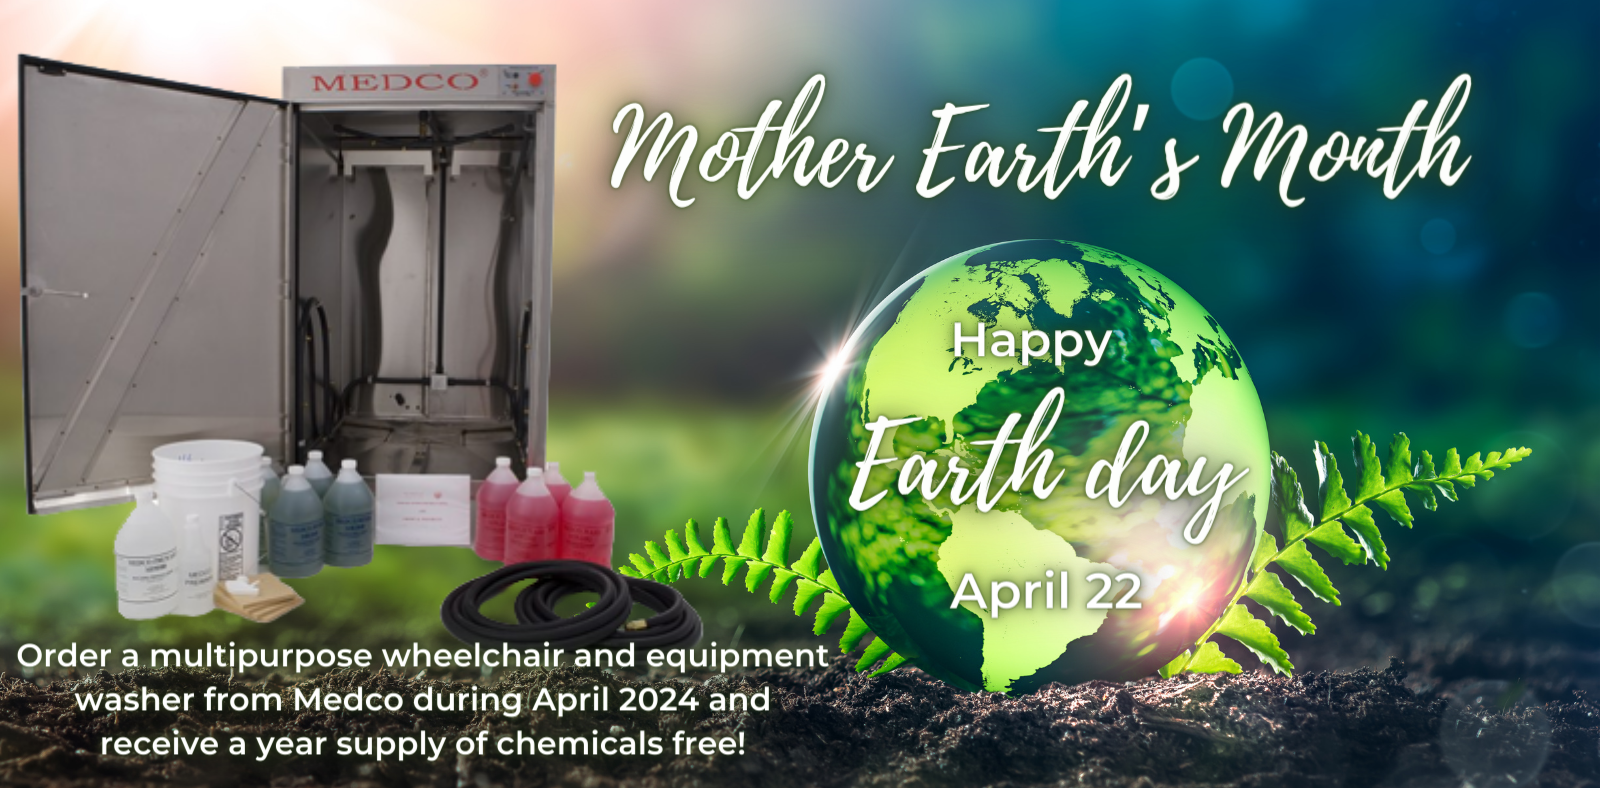 Order a multipurpose wheelchair and equipment washer from Medco during April 2024 and receive a year supply of chemicals free!